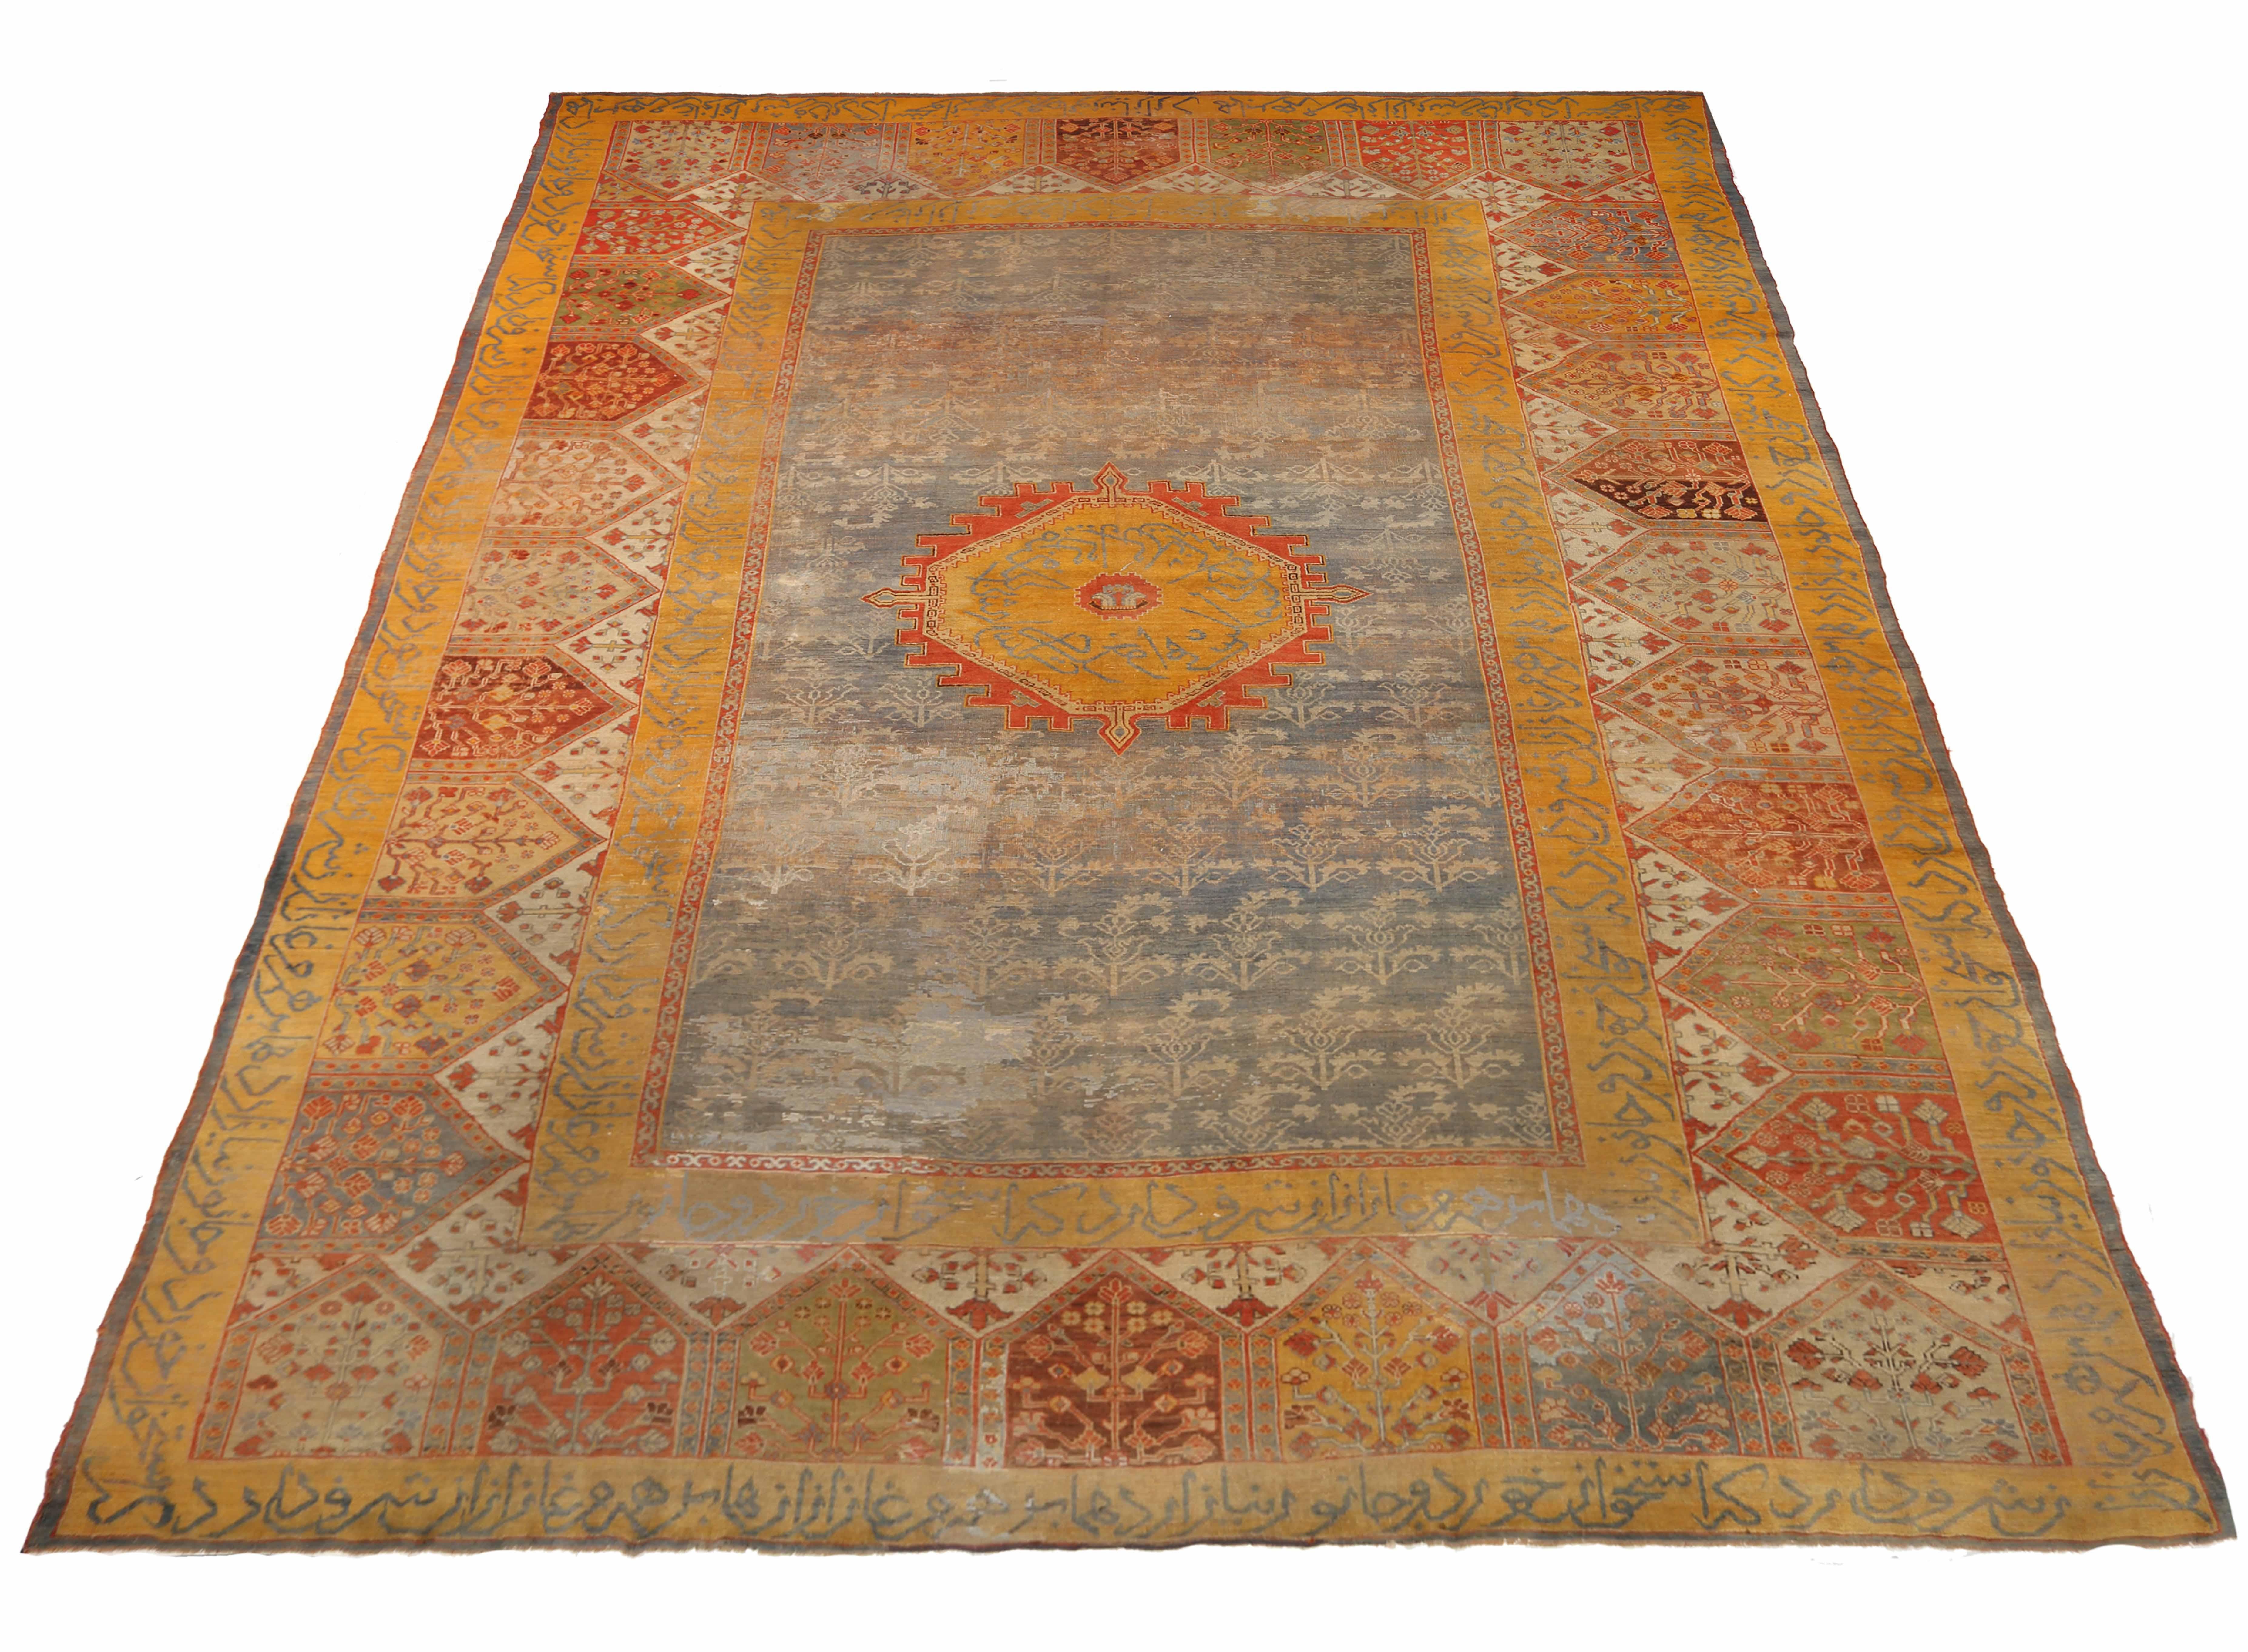 It has a dimension of 14'7'' x 19'2'' which works well for adorning large, open spaces like living rooms and dining areas. 

Turkish Oushaks such has this, have been renowned for the unusual designs and color combinations for hundreds of years.